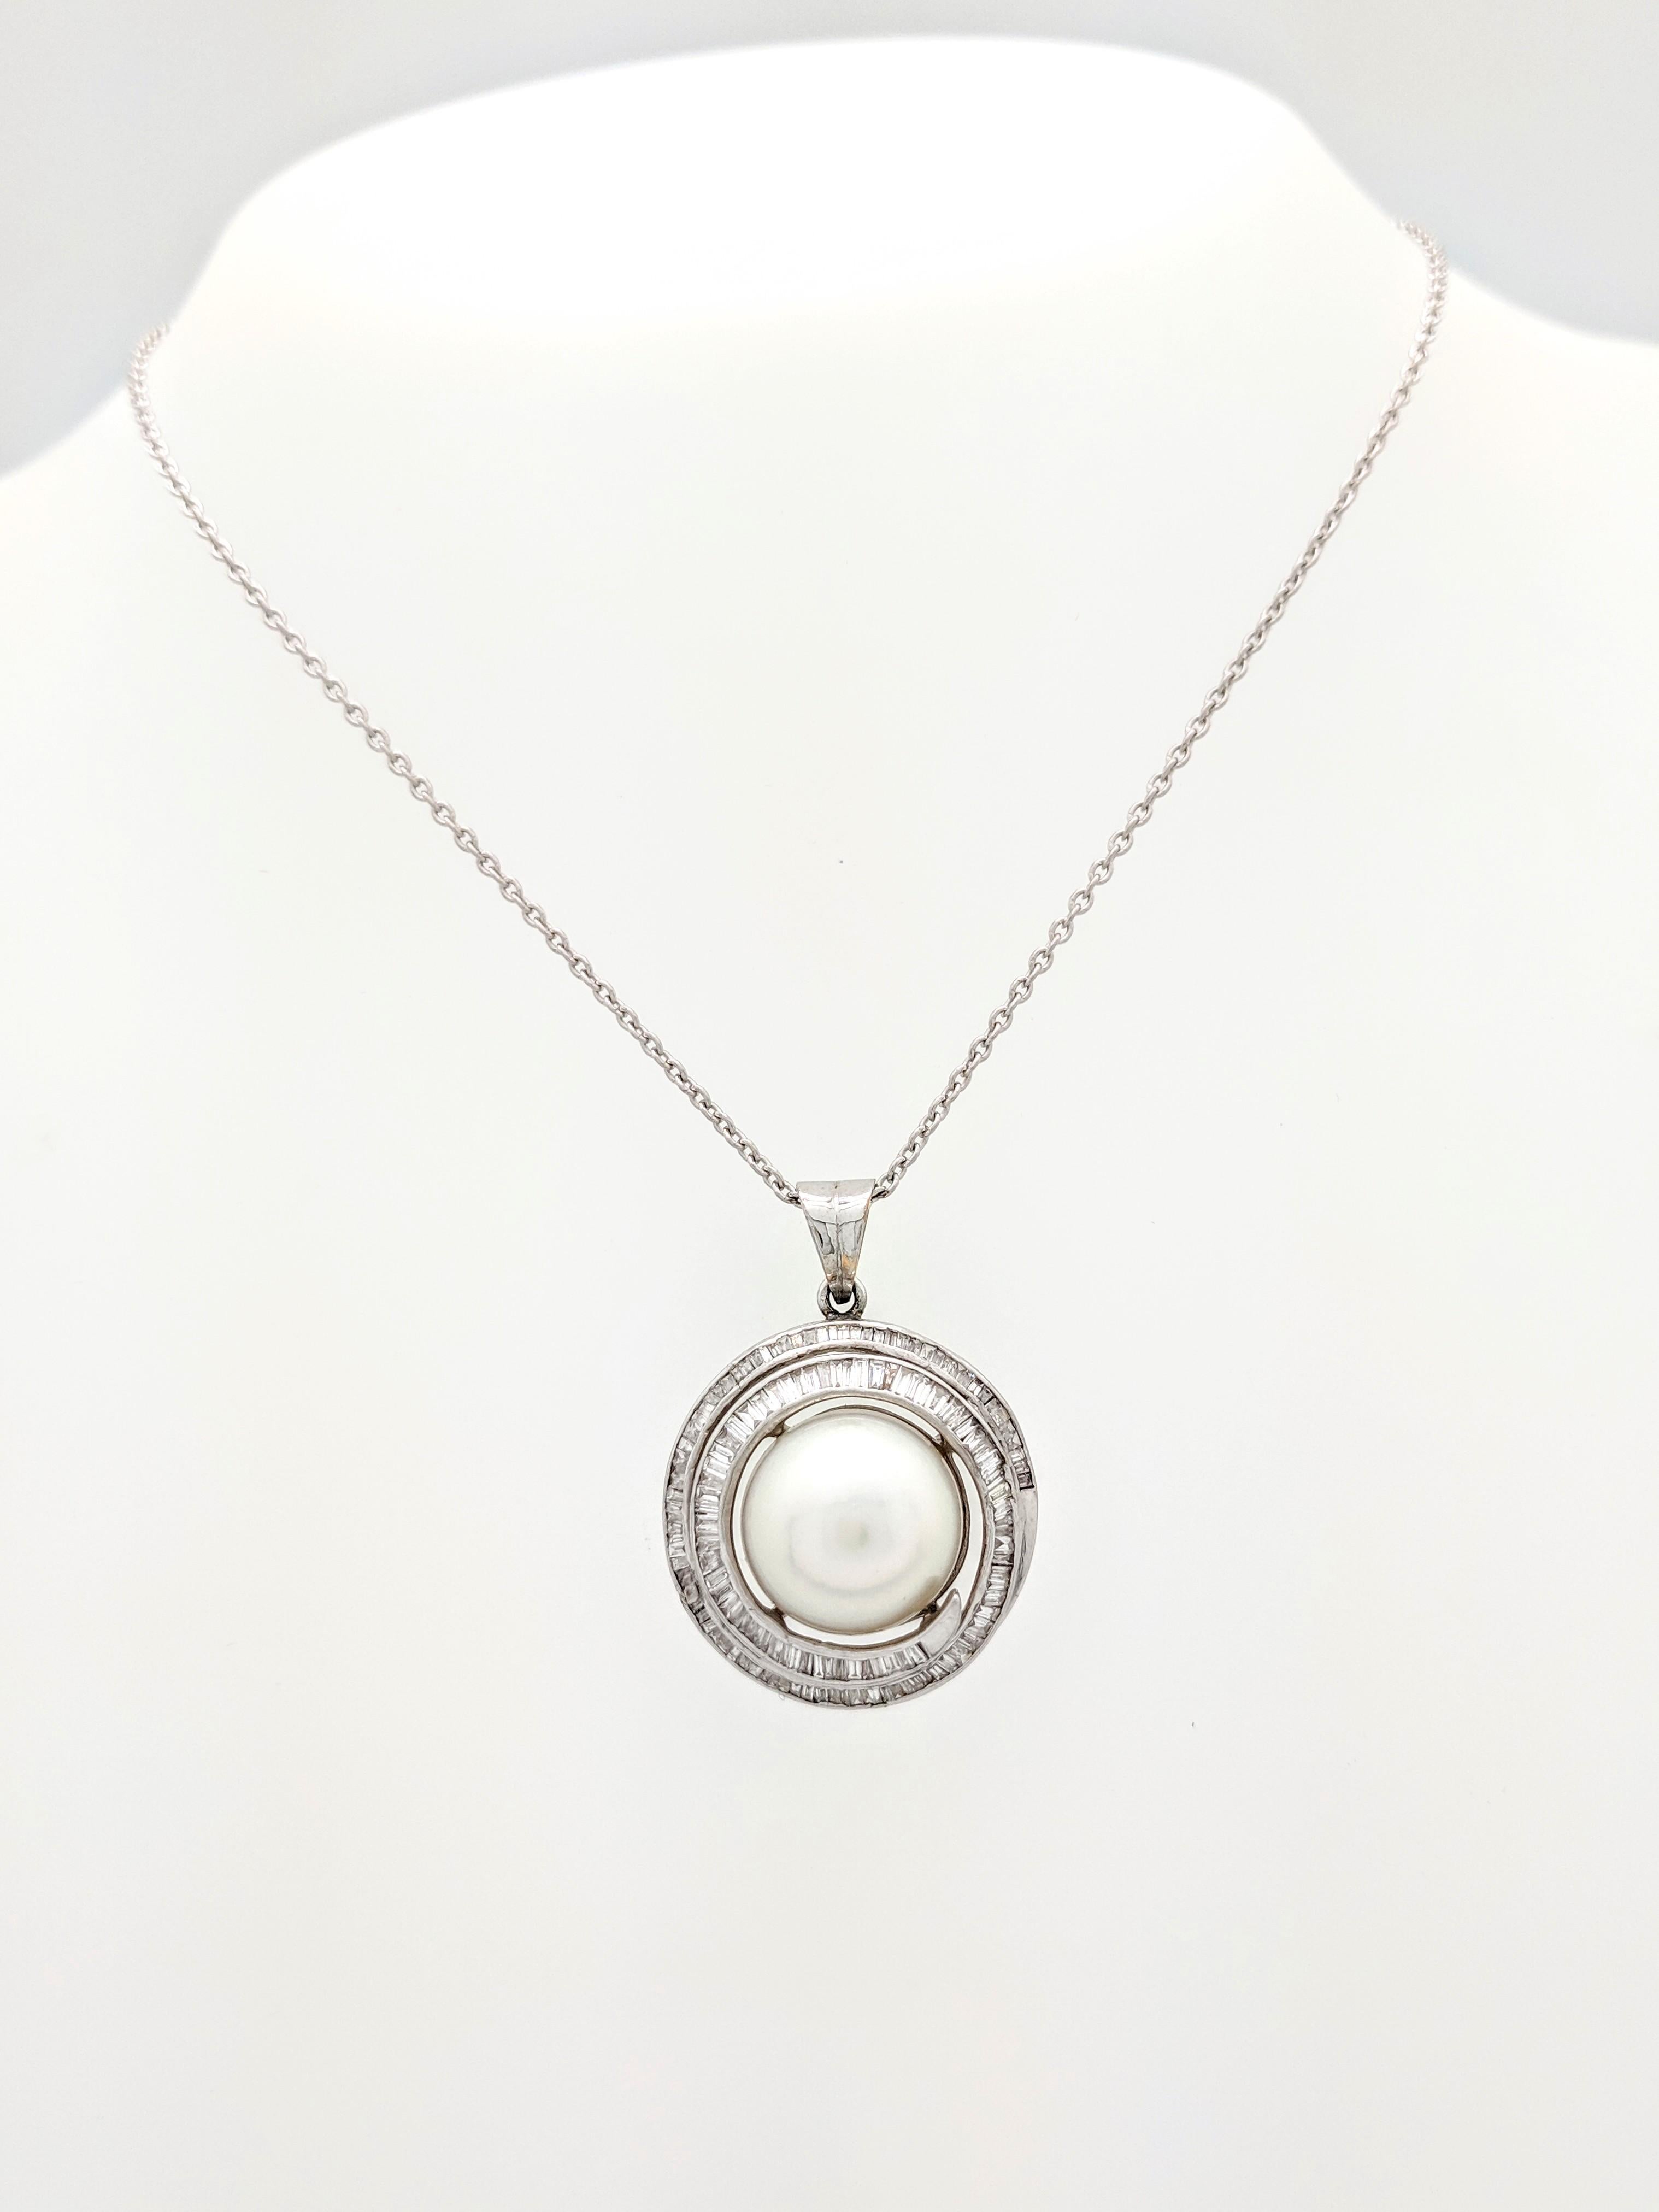 14K White Gold 11.5mm Mabe Pearl & Baguette Cut Diamond Swirl Pendant Necklace

You are viewing a beautiful mabe pearl & diamond pendant necklace.

This piece is crafted from 14k white gold and weighs 11.3 grams. It features approximately (1) 11.5mm